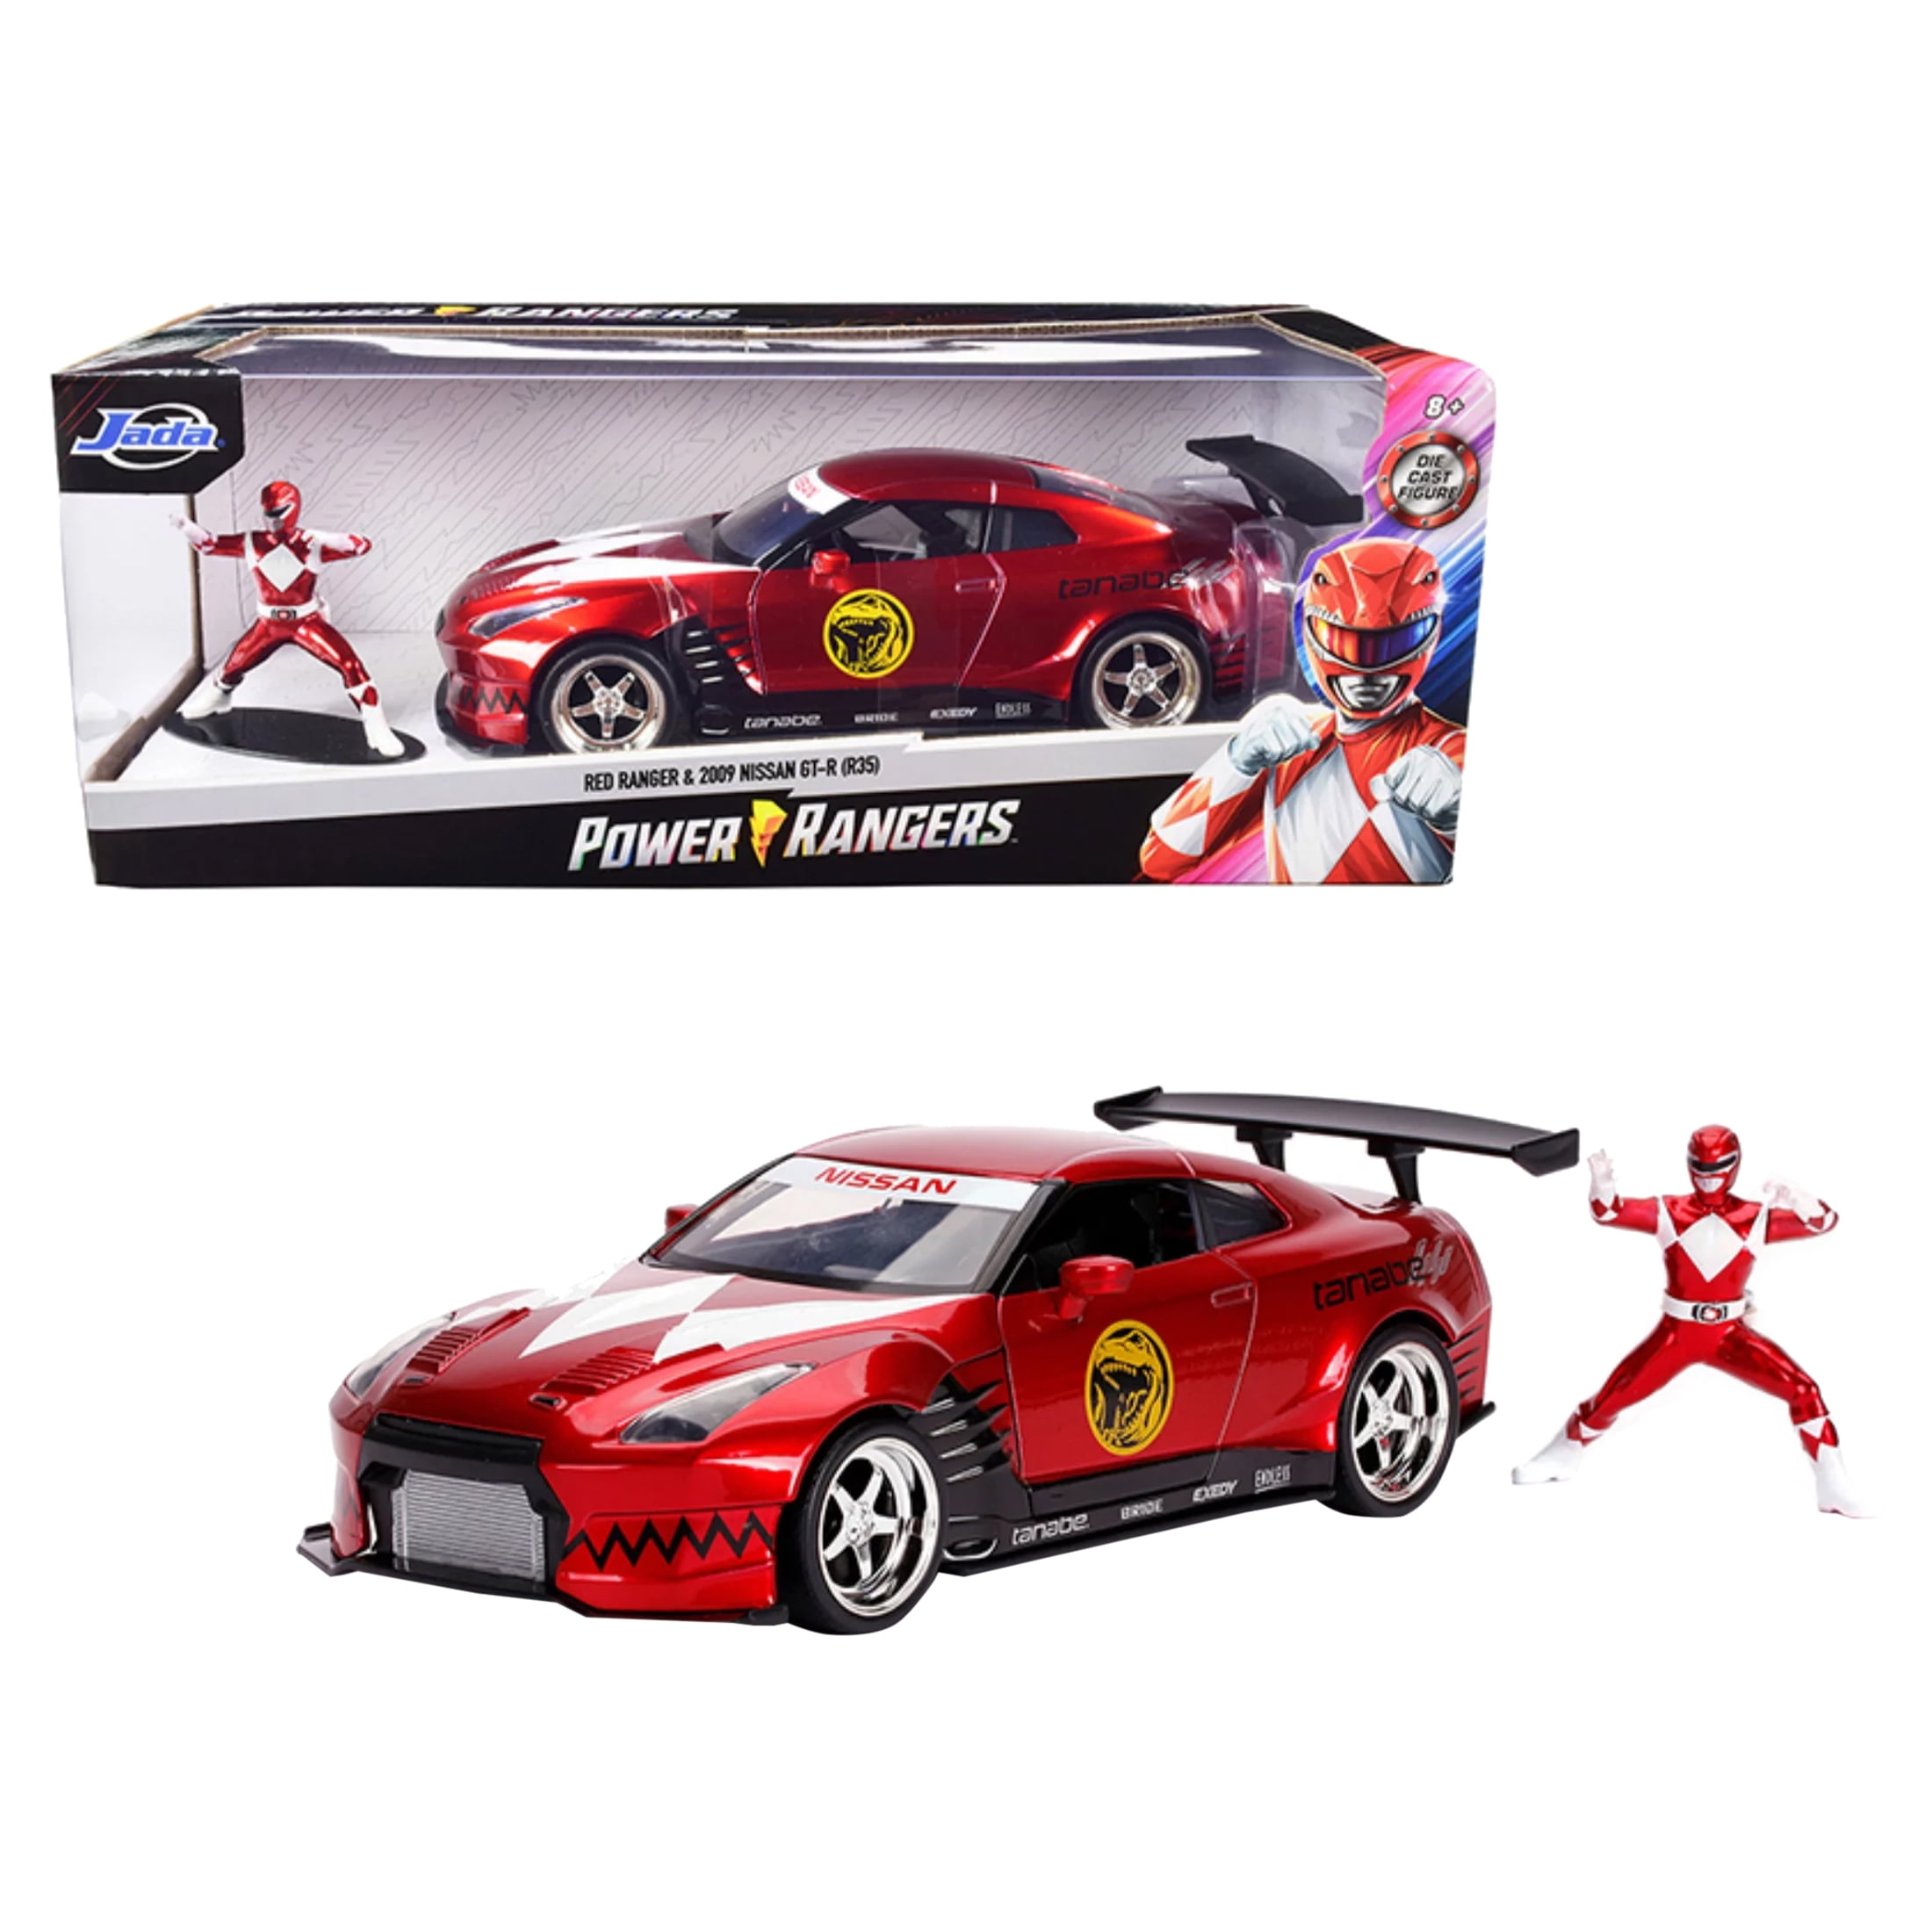 Red Plastic RK-829 Crash Car Toy, For Personal